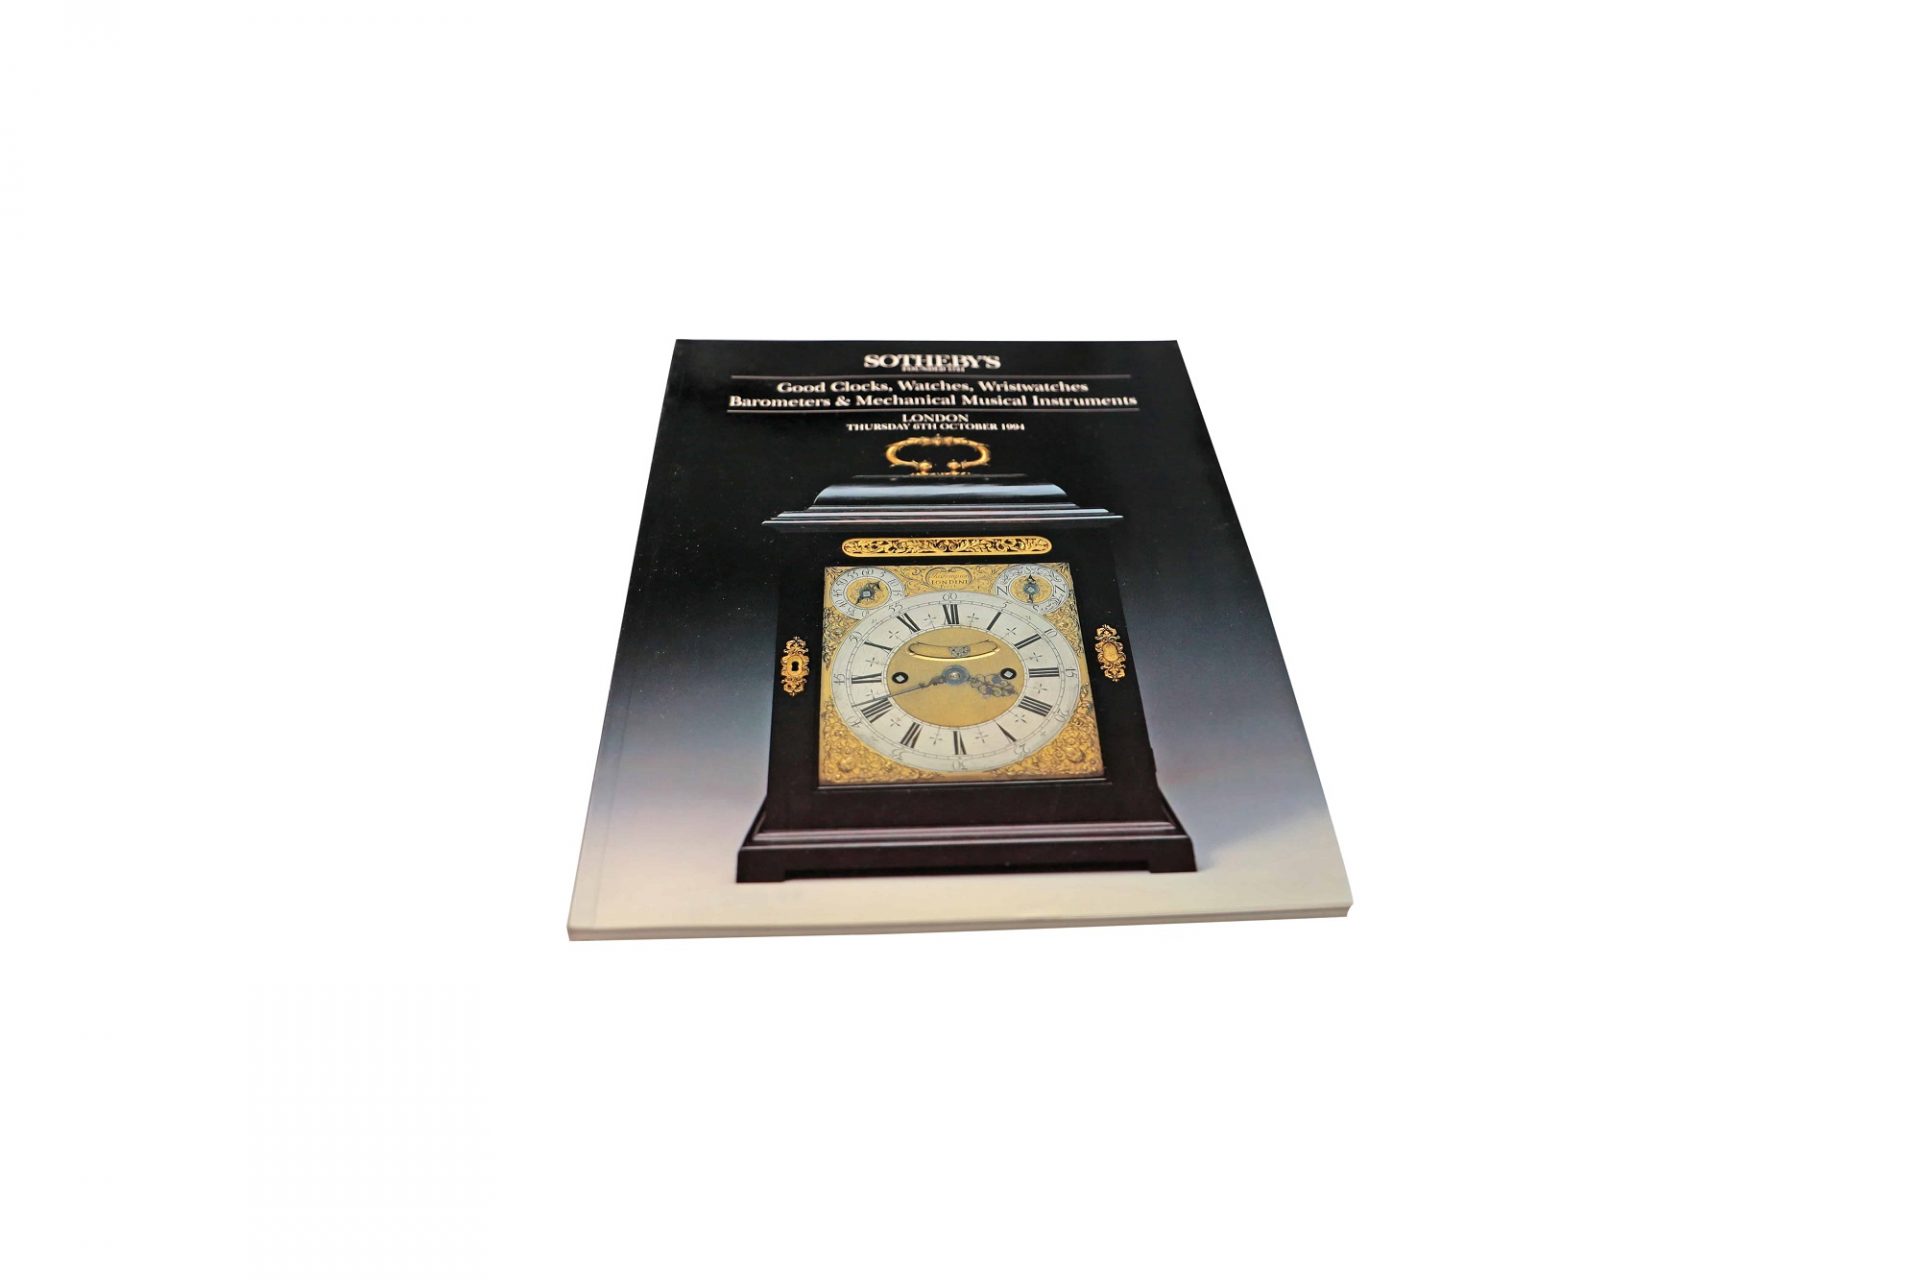 Sotheby's Good Clocks, Watches, Wristwatches Barometers And Mechanical Musical Instruments Landon October 11, 1994 Auction Catalog - Rare Watch Parts